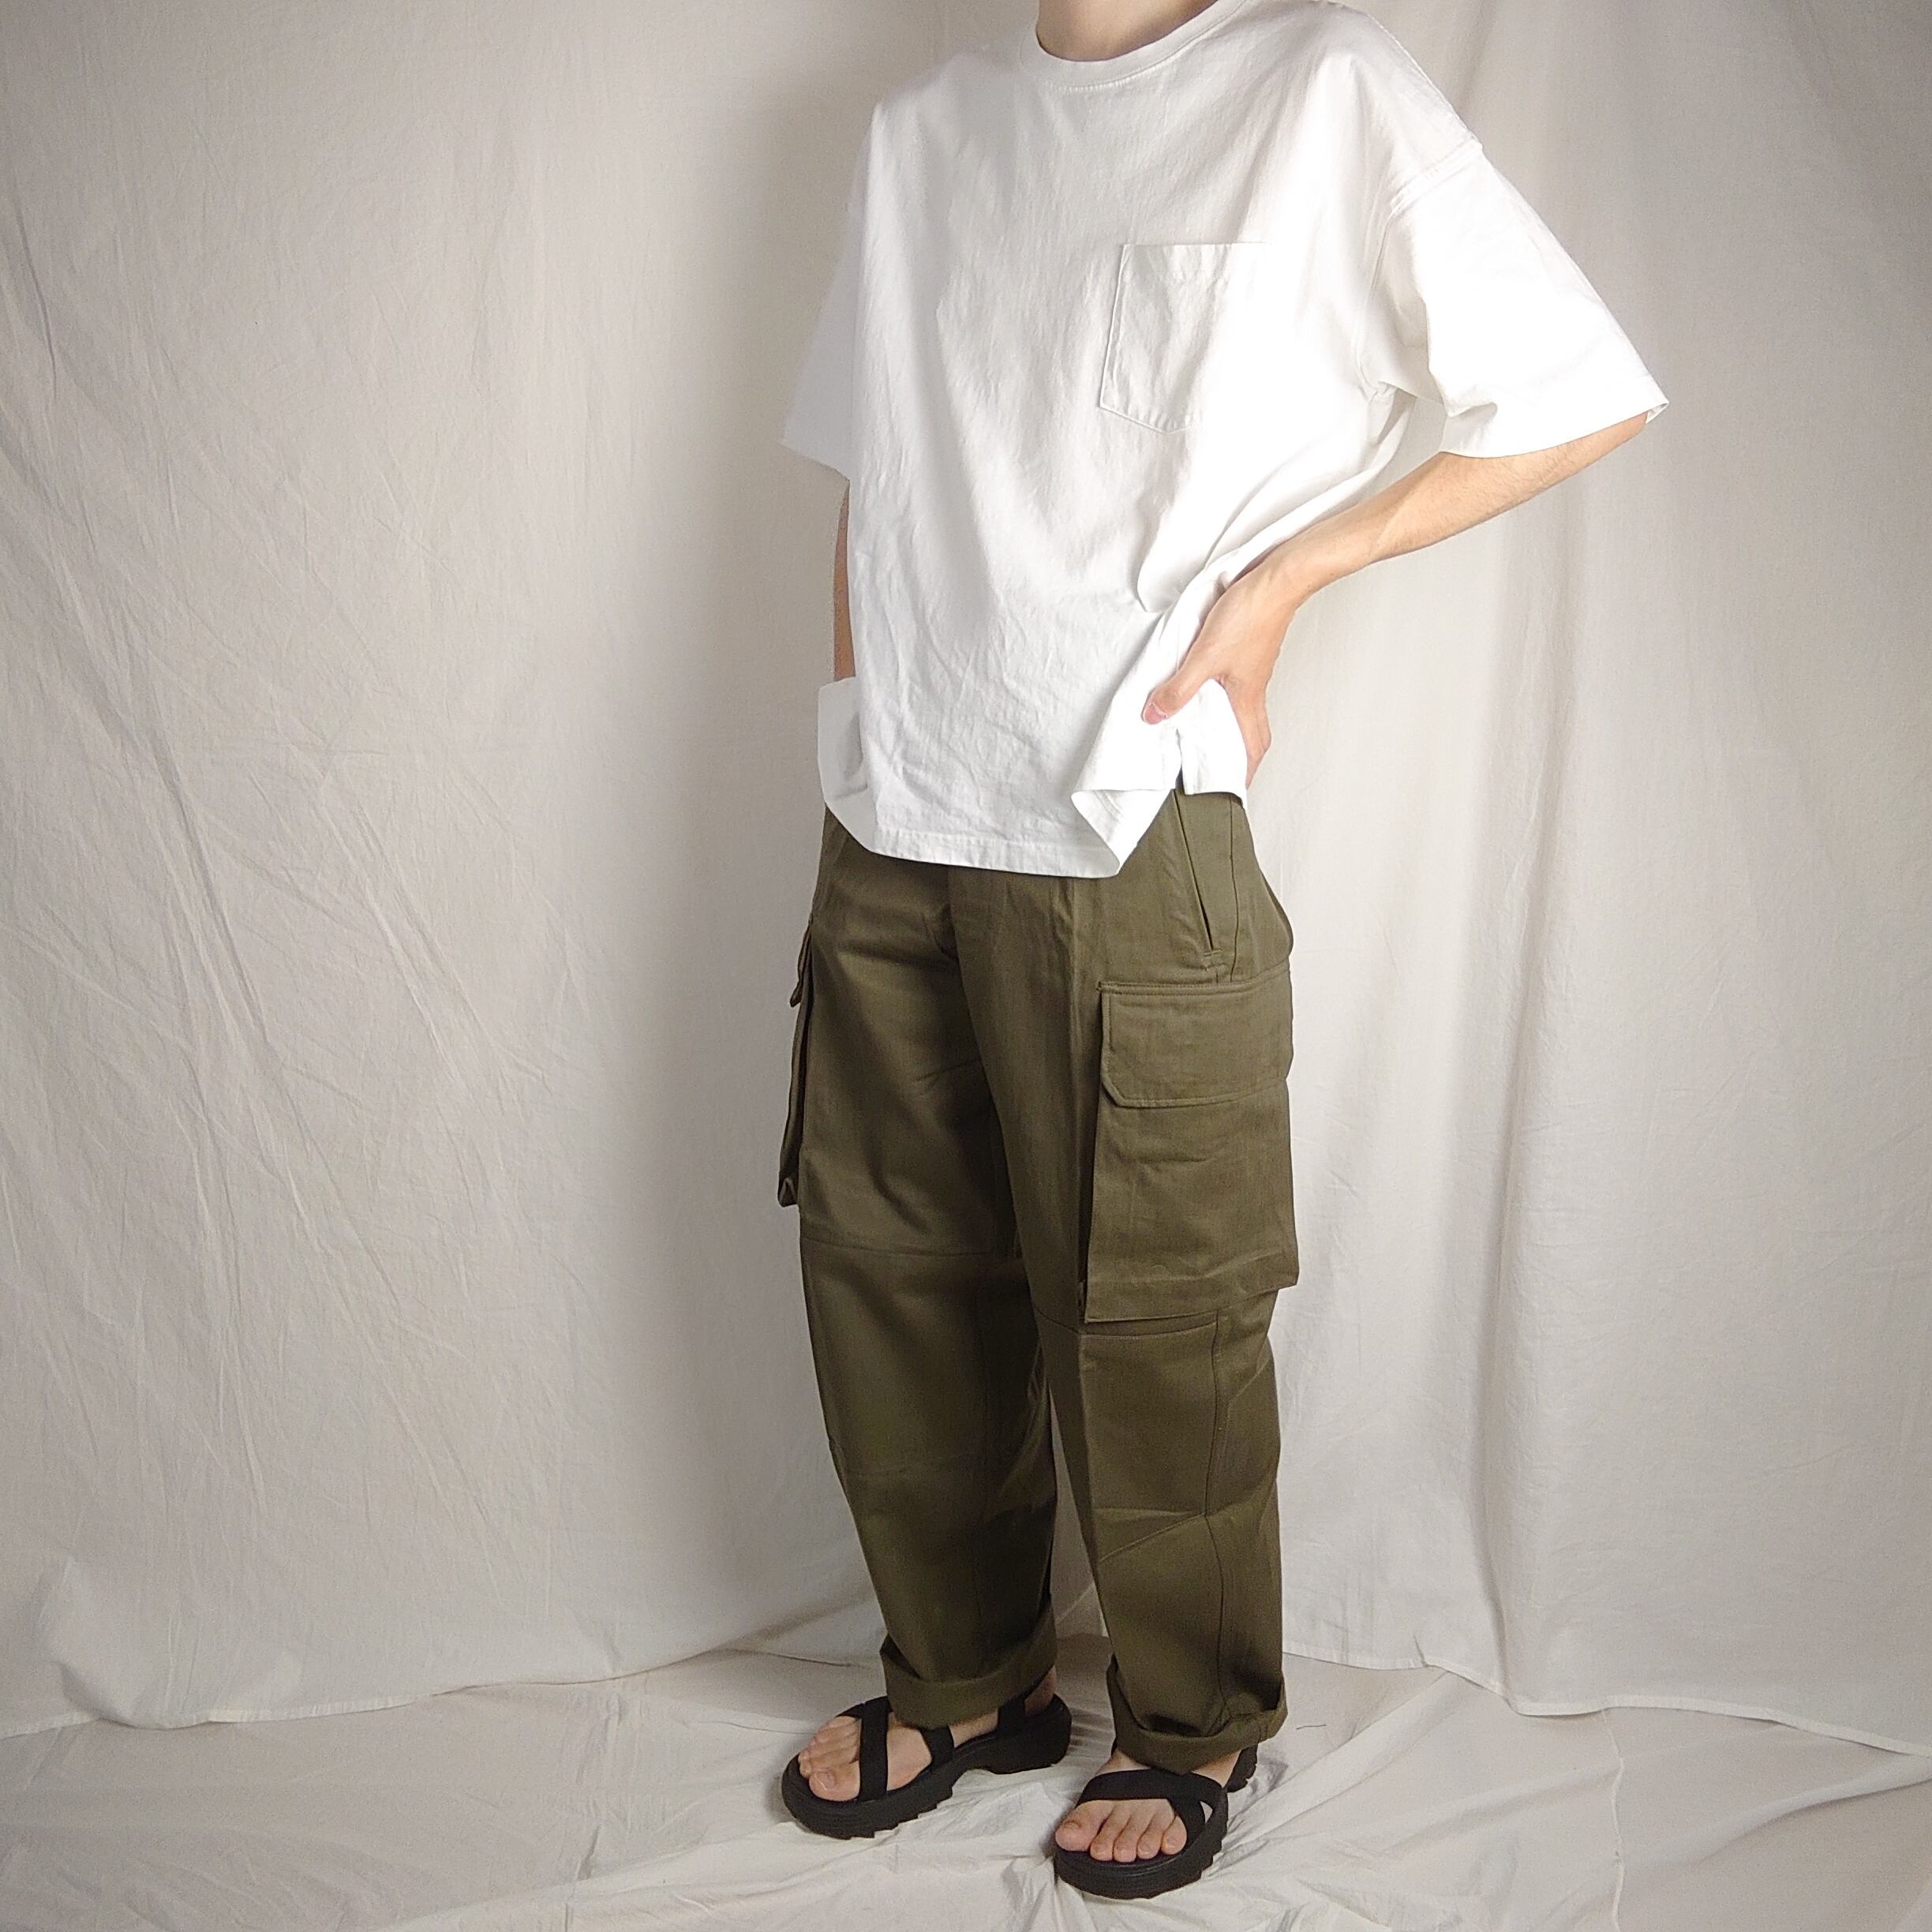 【Deadstock】French Army フランス軍 M47パンツ 31 後期